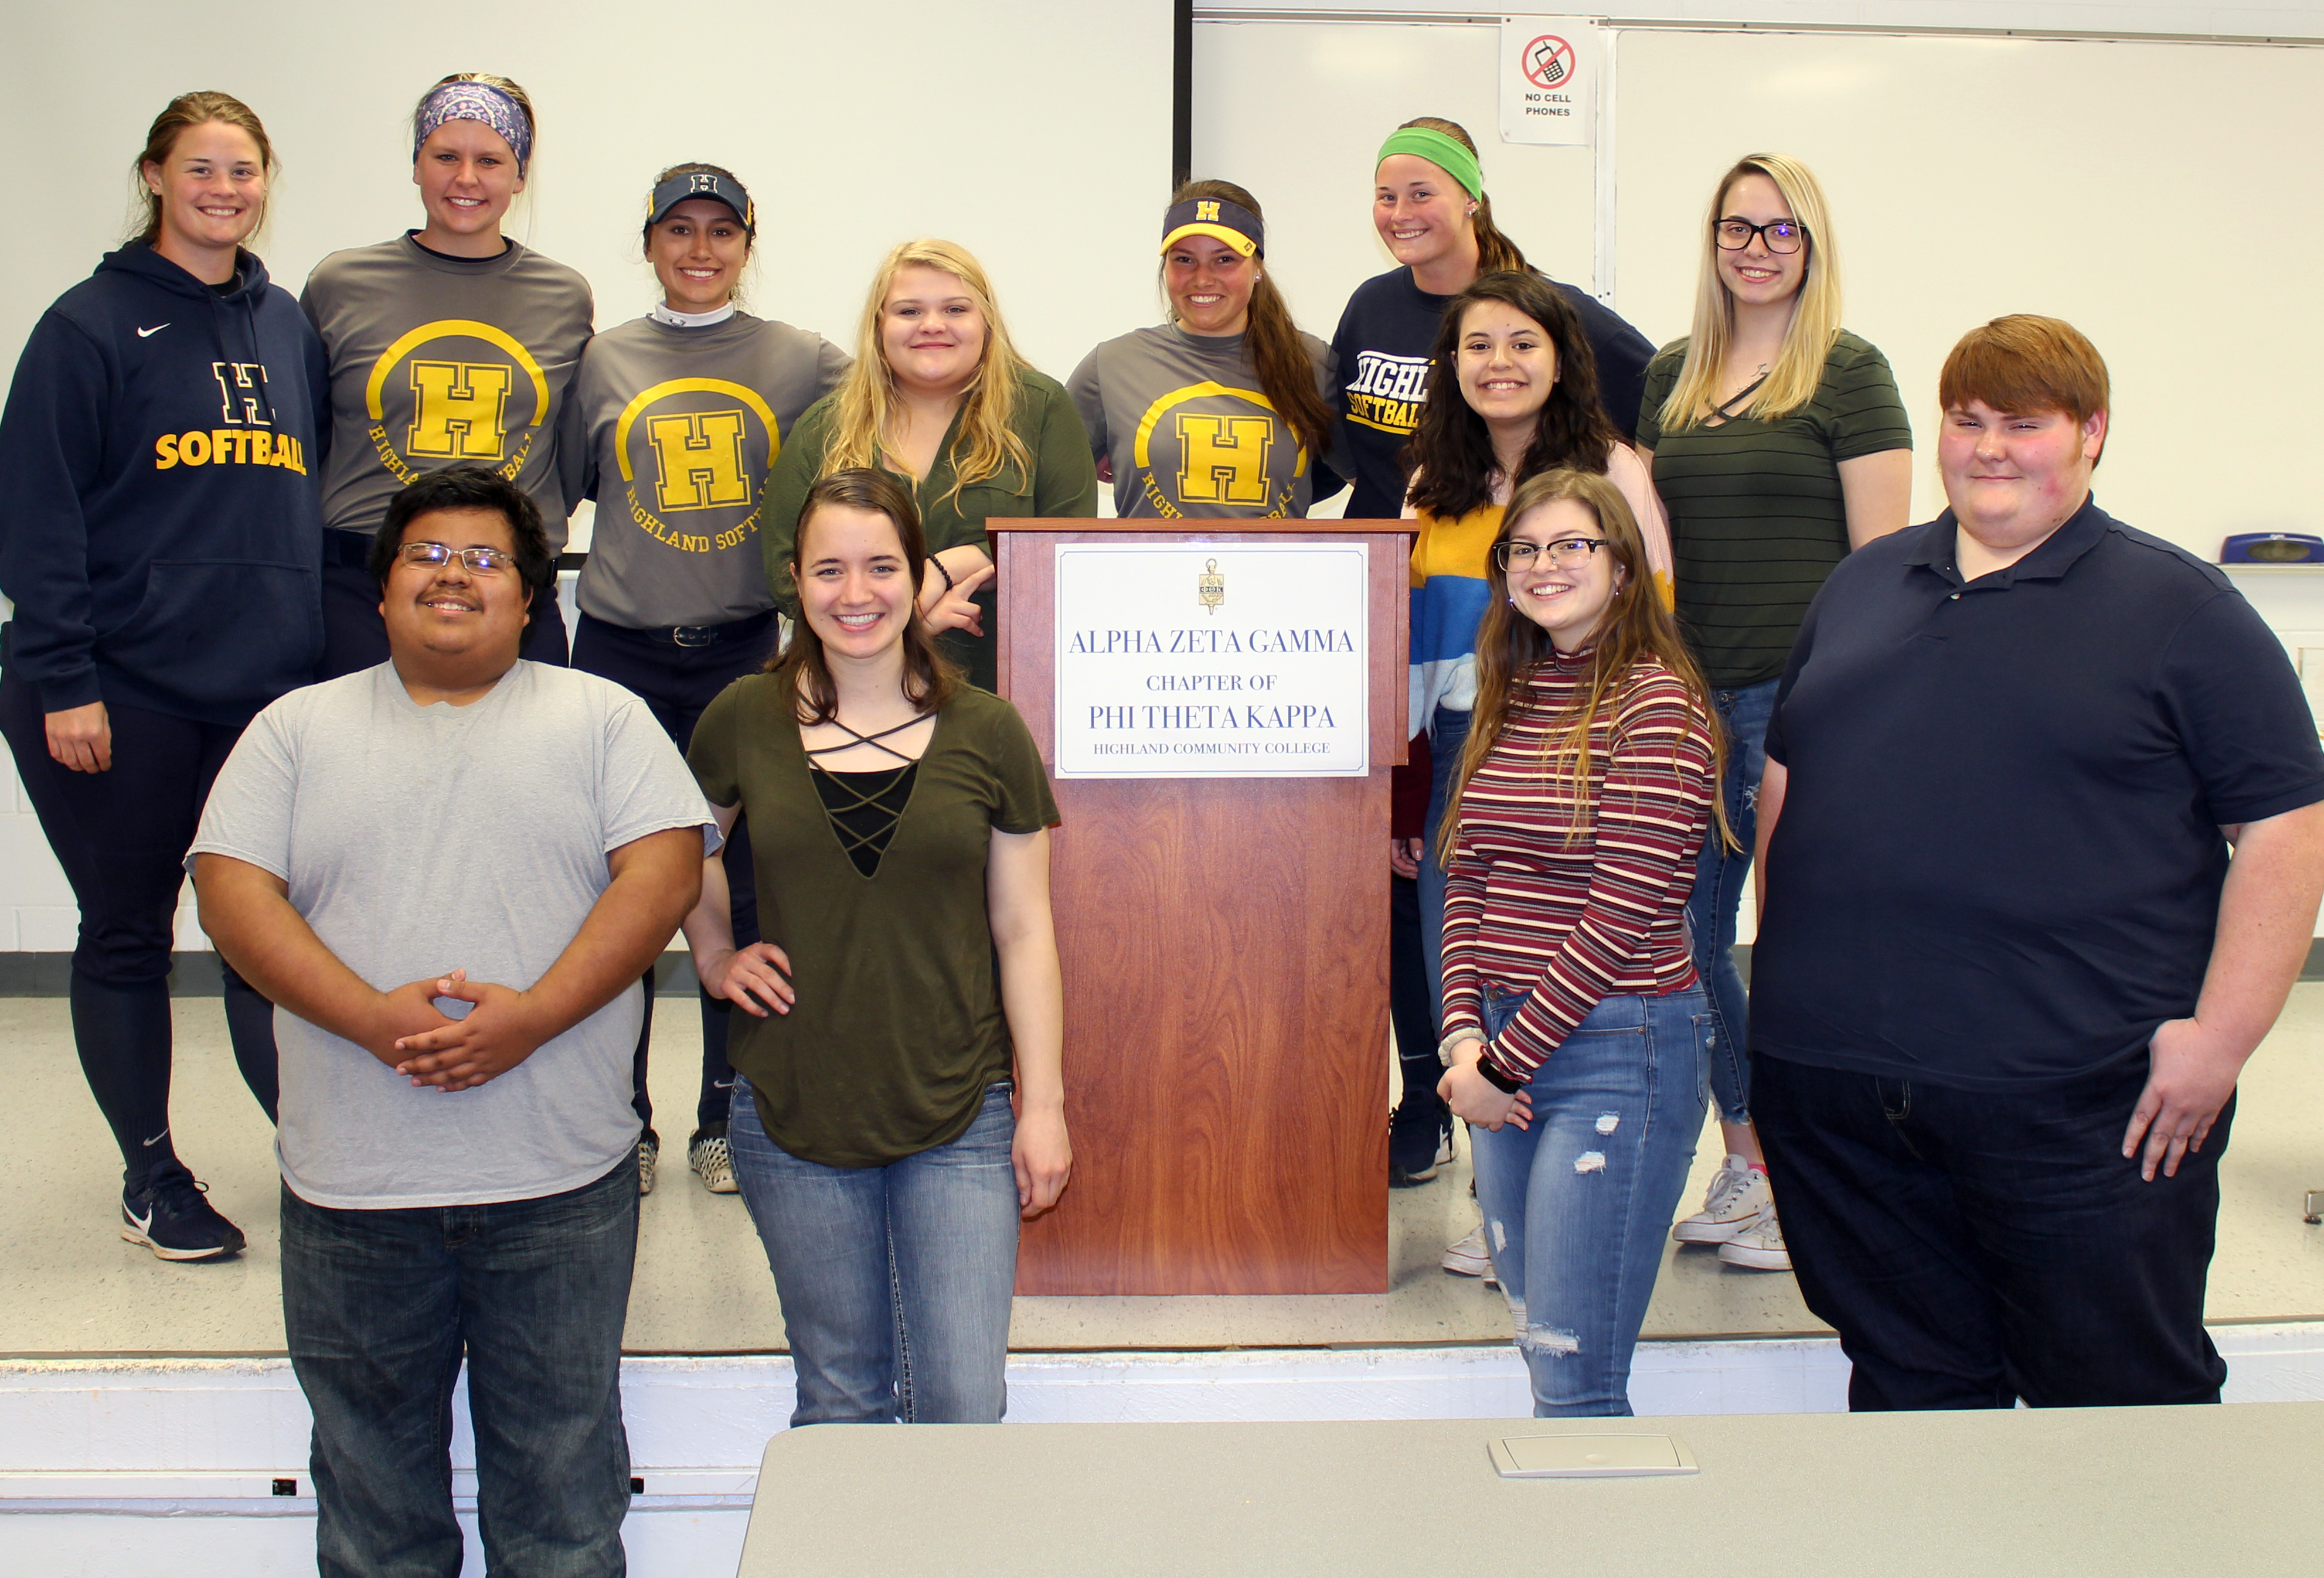 Highland Community College Students Join Collegiate Honor Society Group